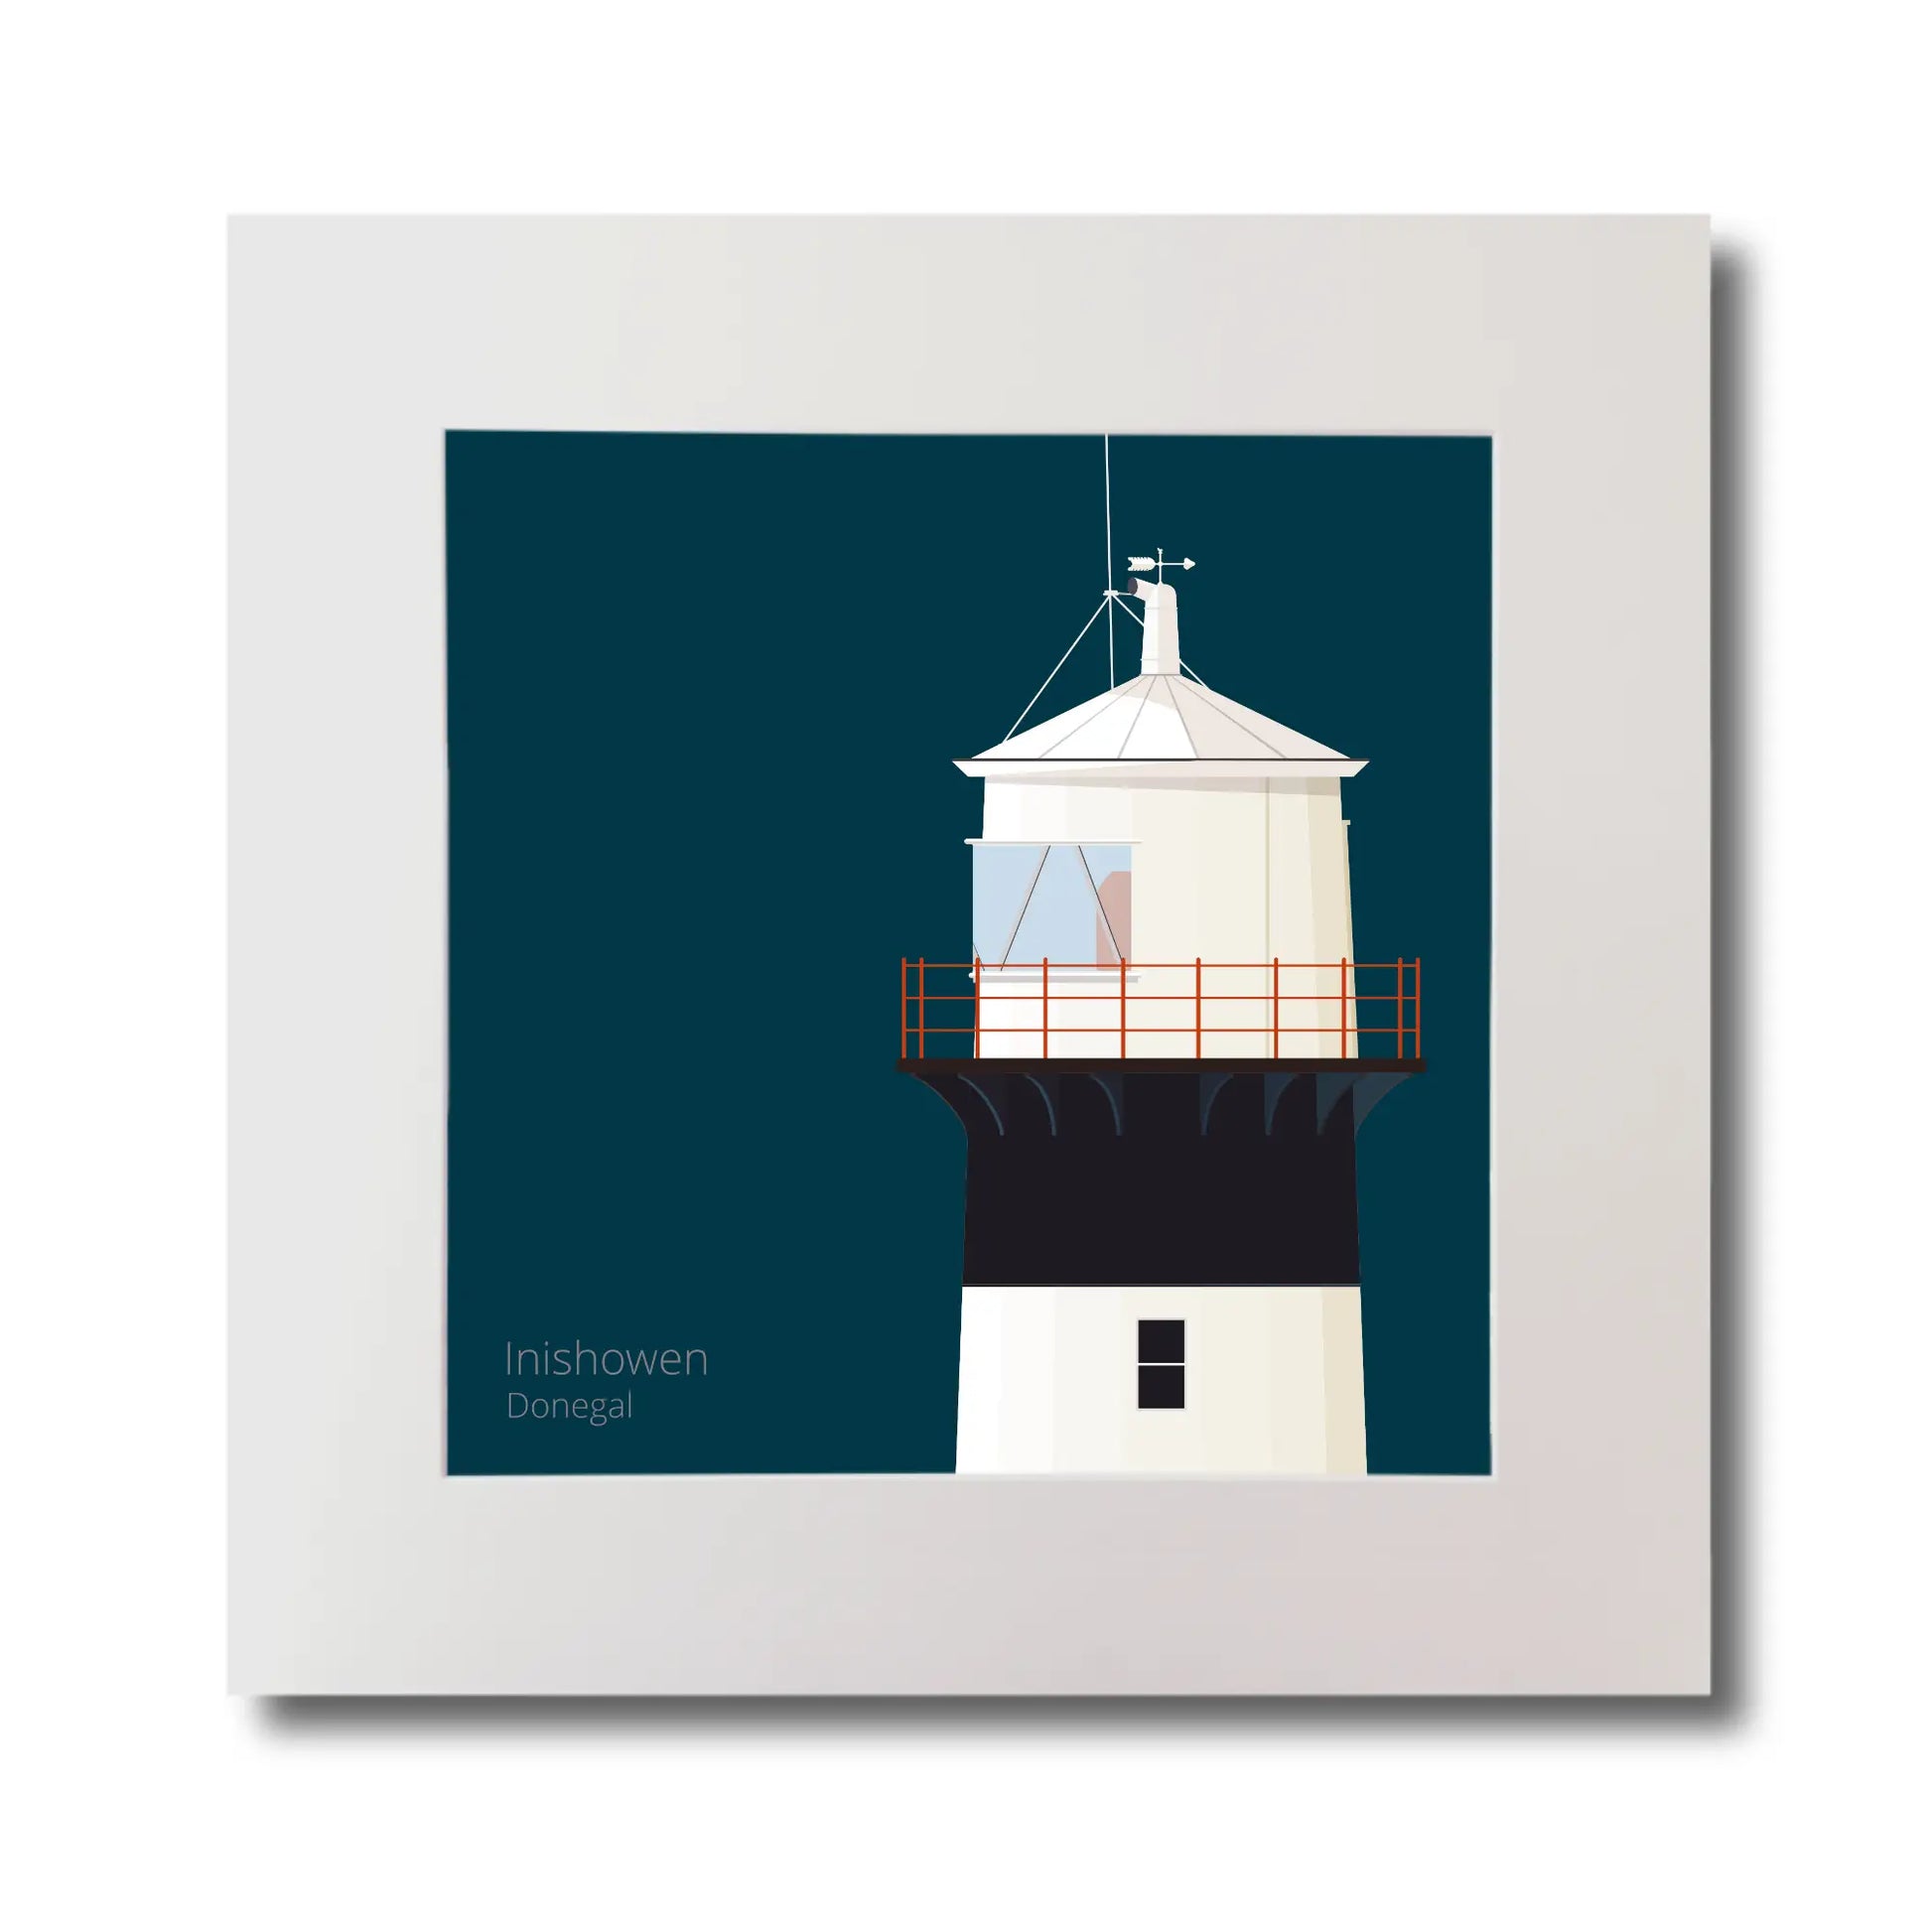 Illustration of inishowen lighthouse on a midnight blue background, mounted and measuring 30x30cm.